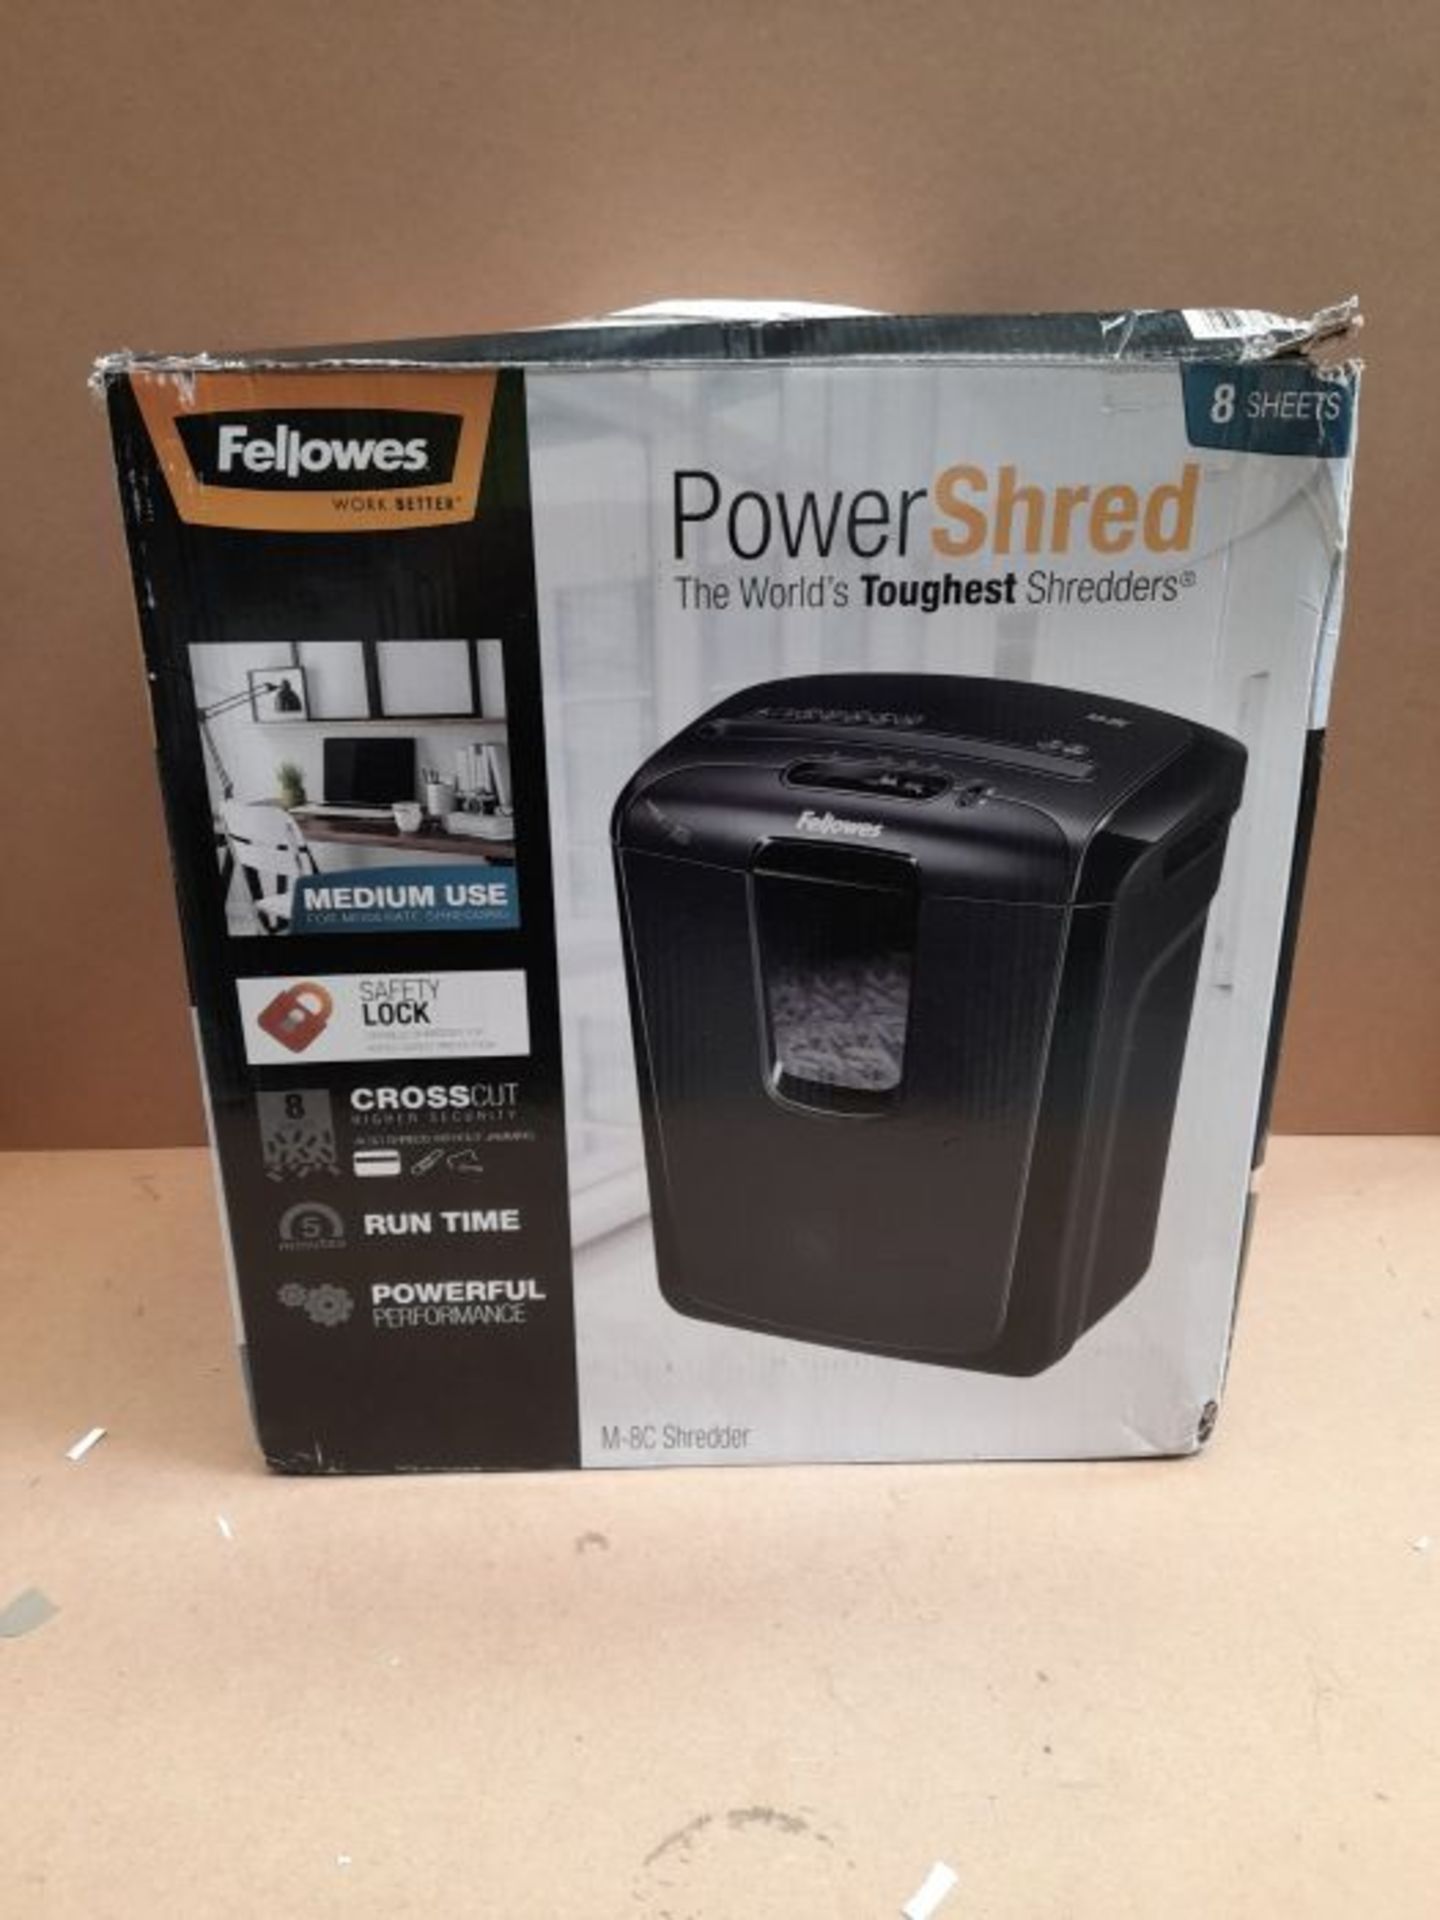 Fellowes Powershred M-8C 8 Sheet Cross Cut Personal Shredder with Safety Lock - Image 2 of 6